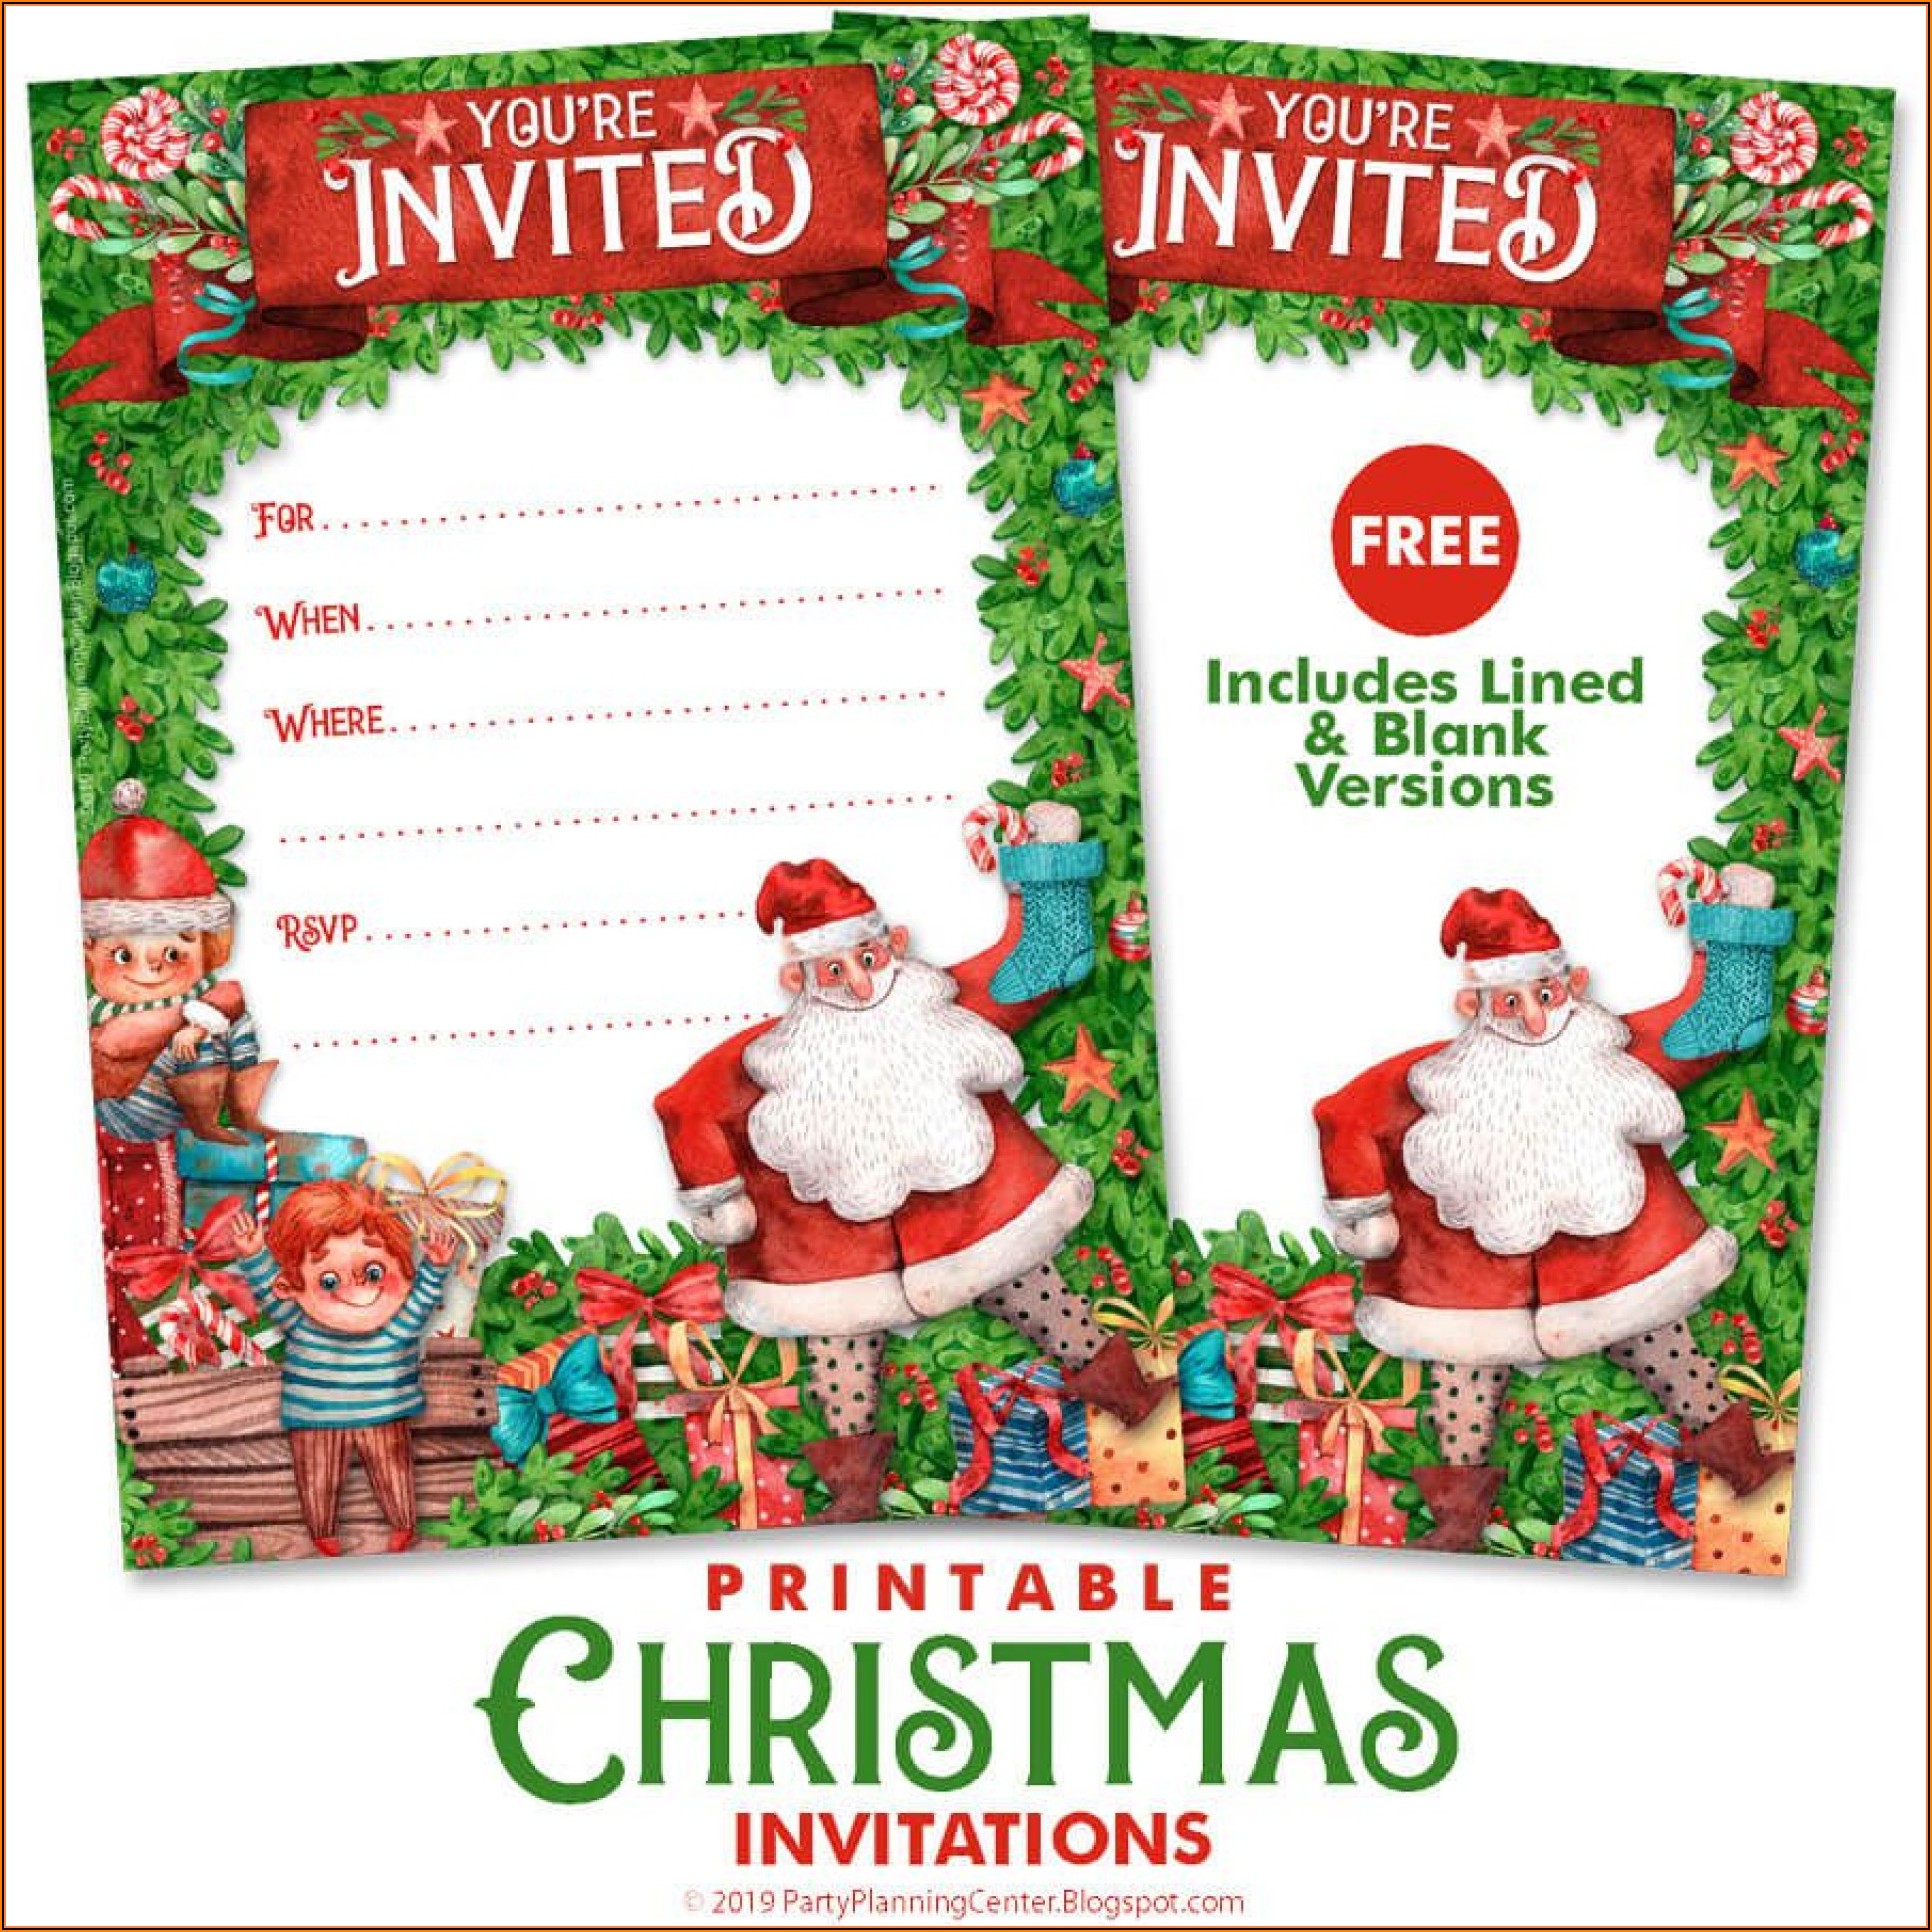 Free Printable Christmas Party Flyer Templates Word